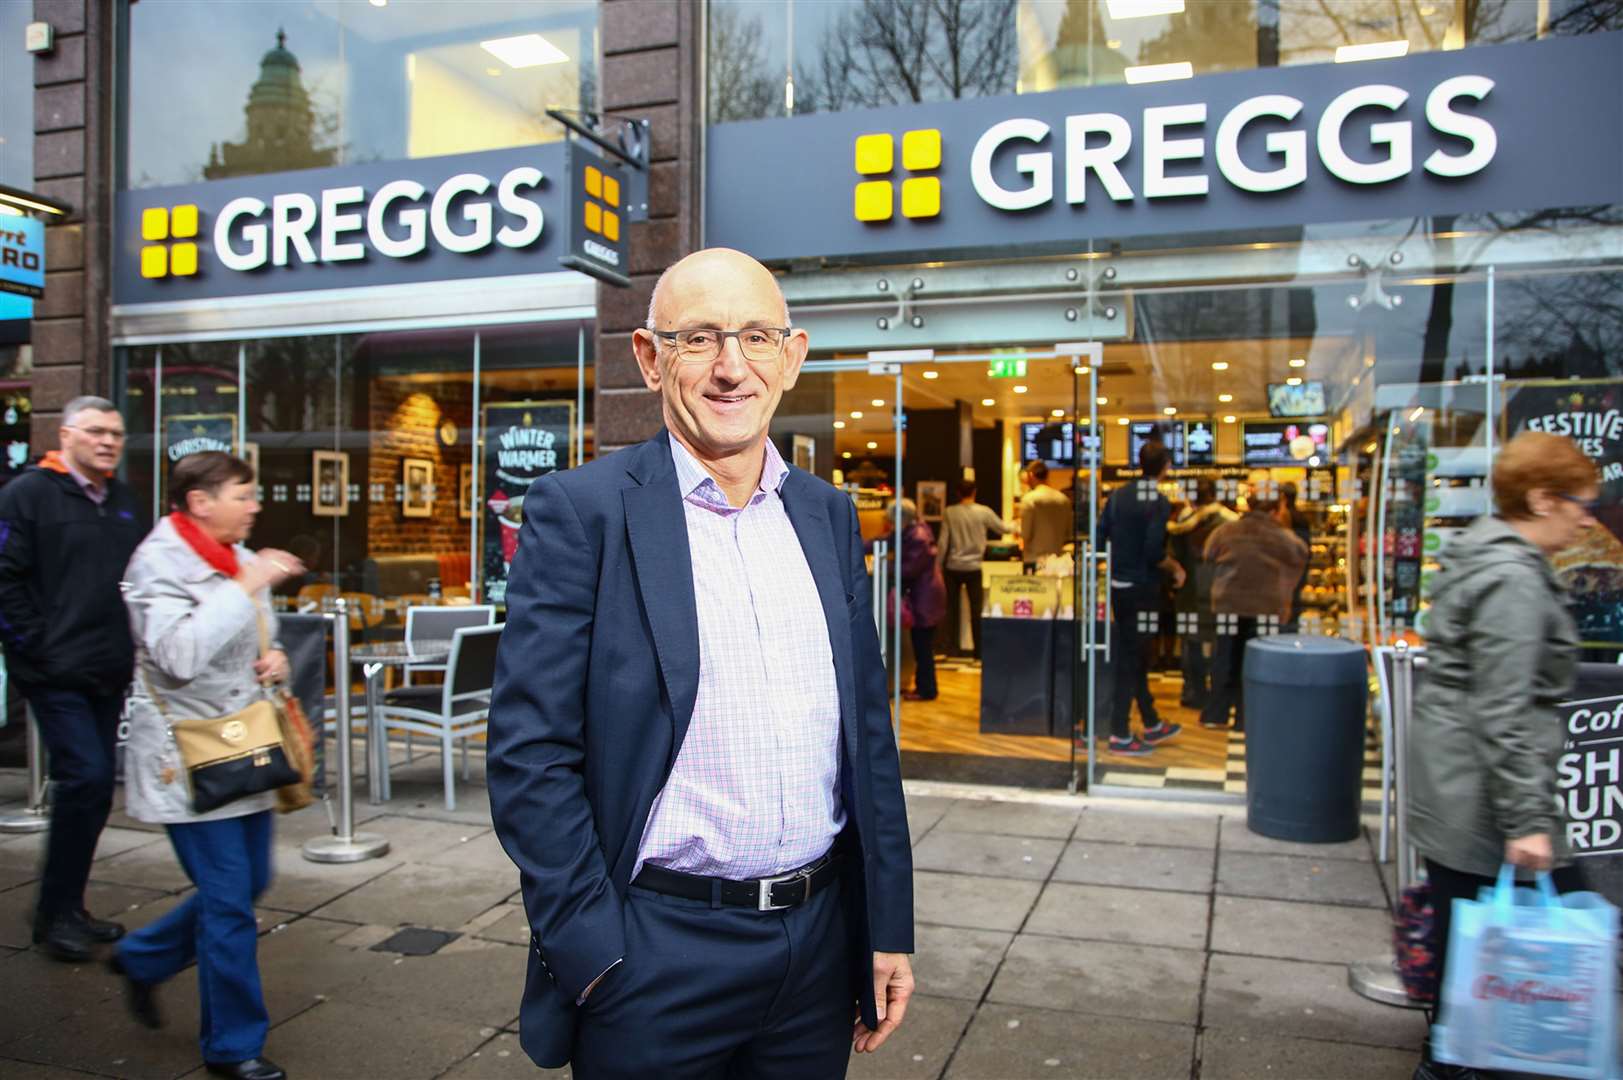 Greggs chief executive Roger Whiteside told staff he hopes to have all stores reopen by July 1 (Greggs/PA)